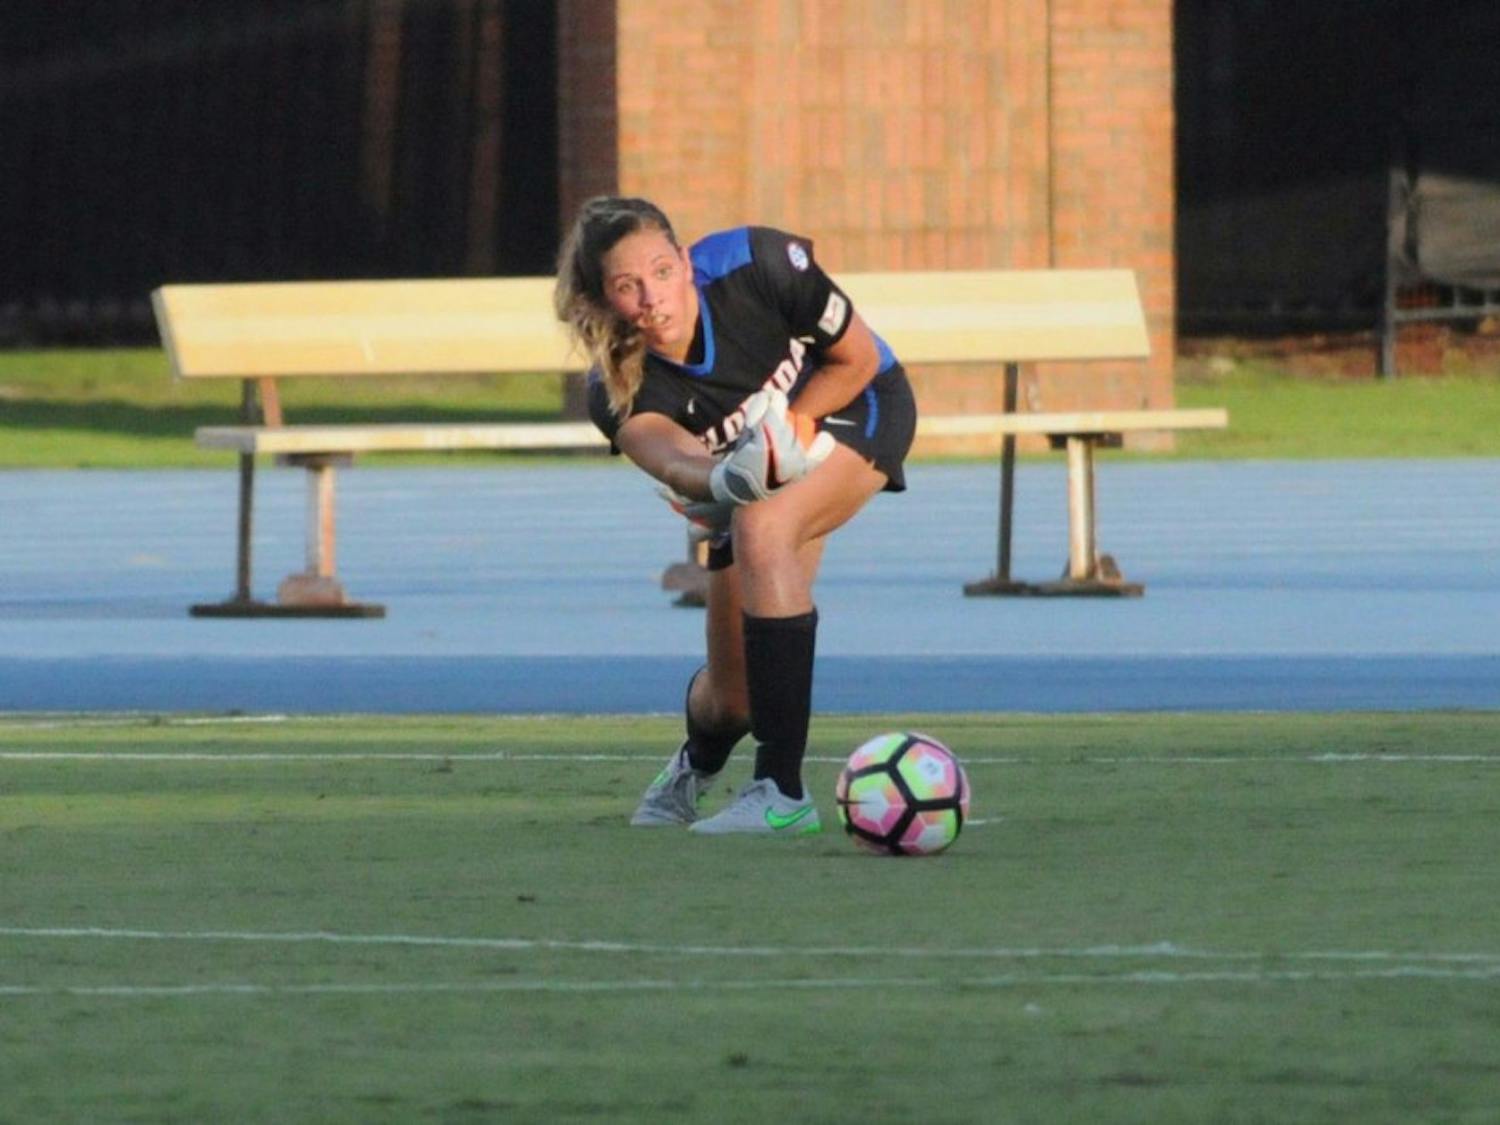 UF goalkeeper Kaylan Marckese allowed two goals against Texas A&amp;M on Thursday, including the game-winning free-kick nearly 45 yards from the goal.